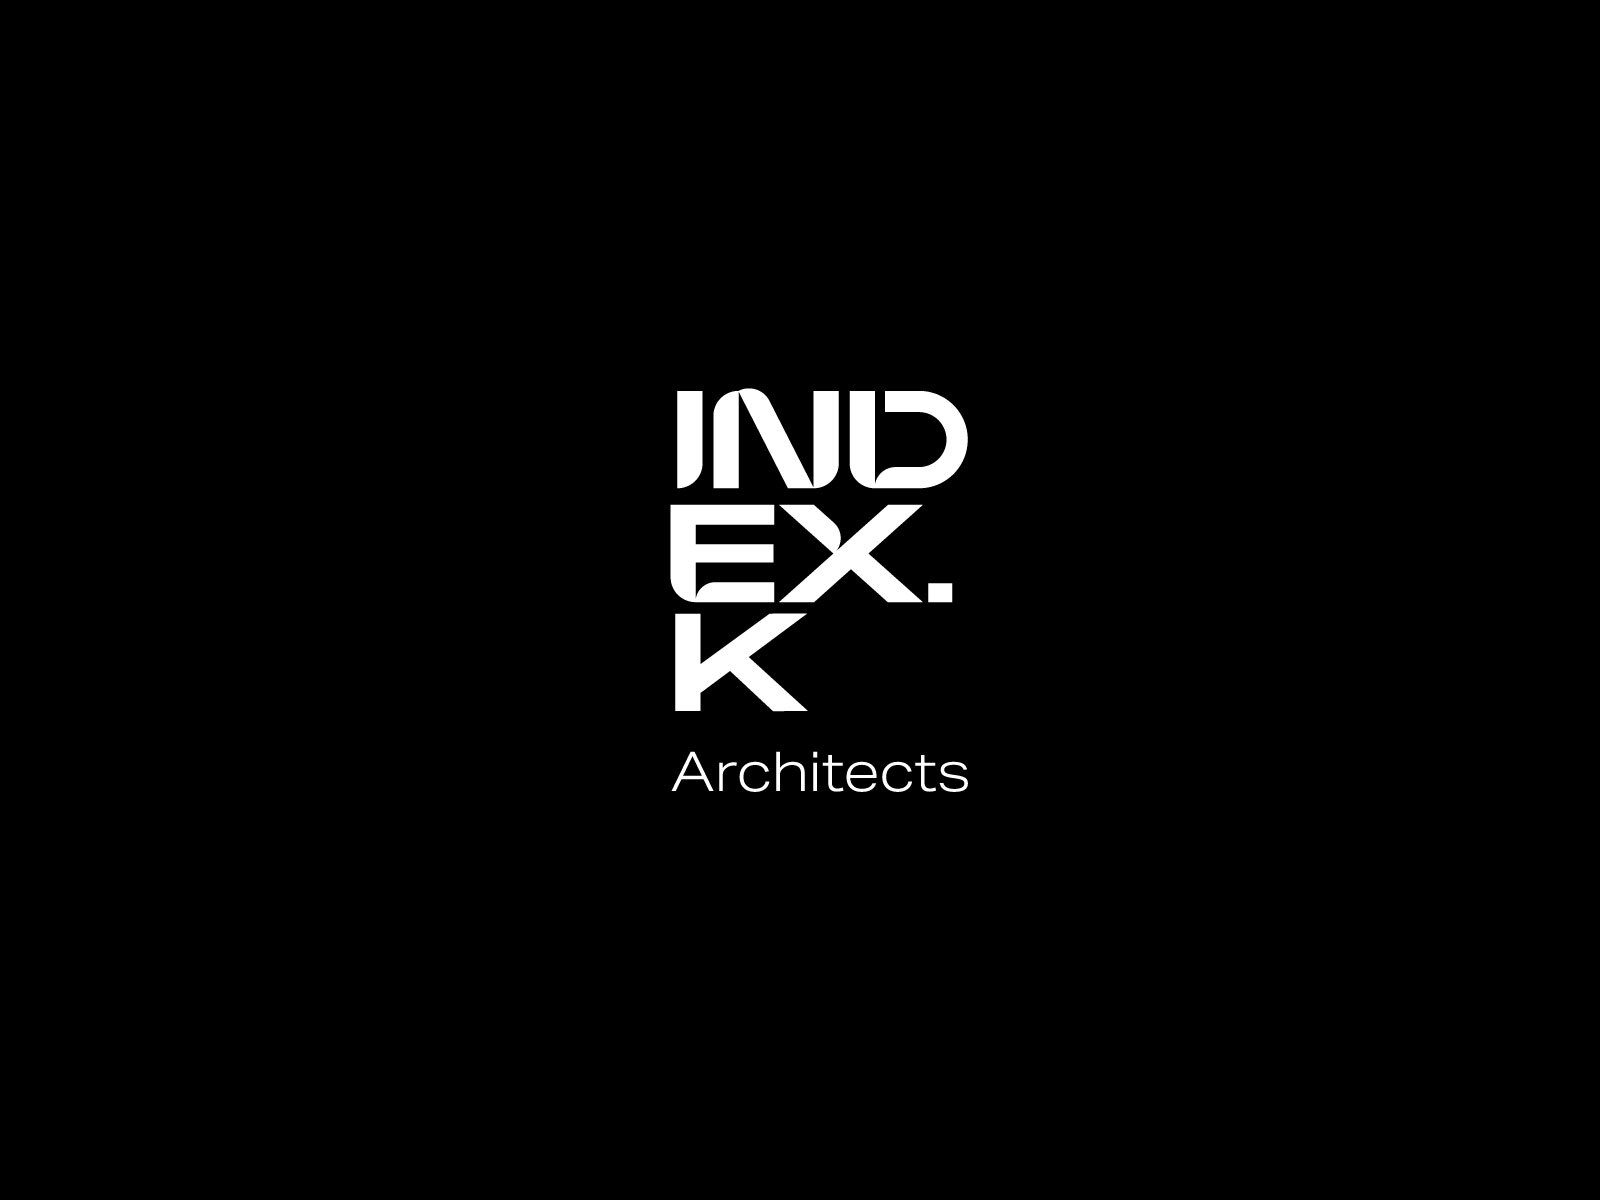 Index-k Is An aspirational Architectural Firm